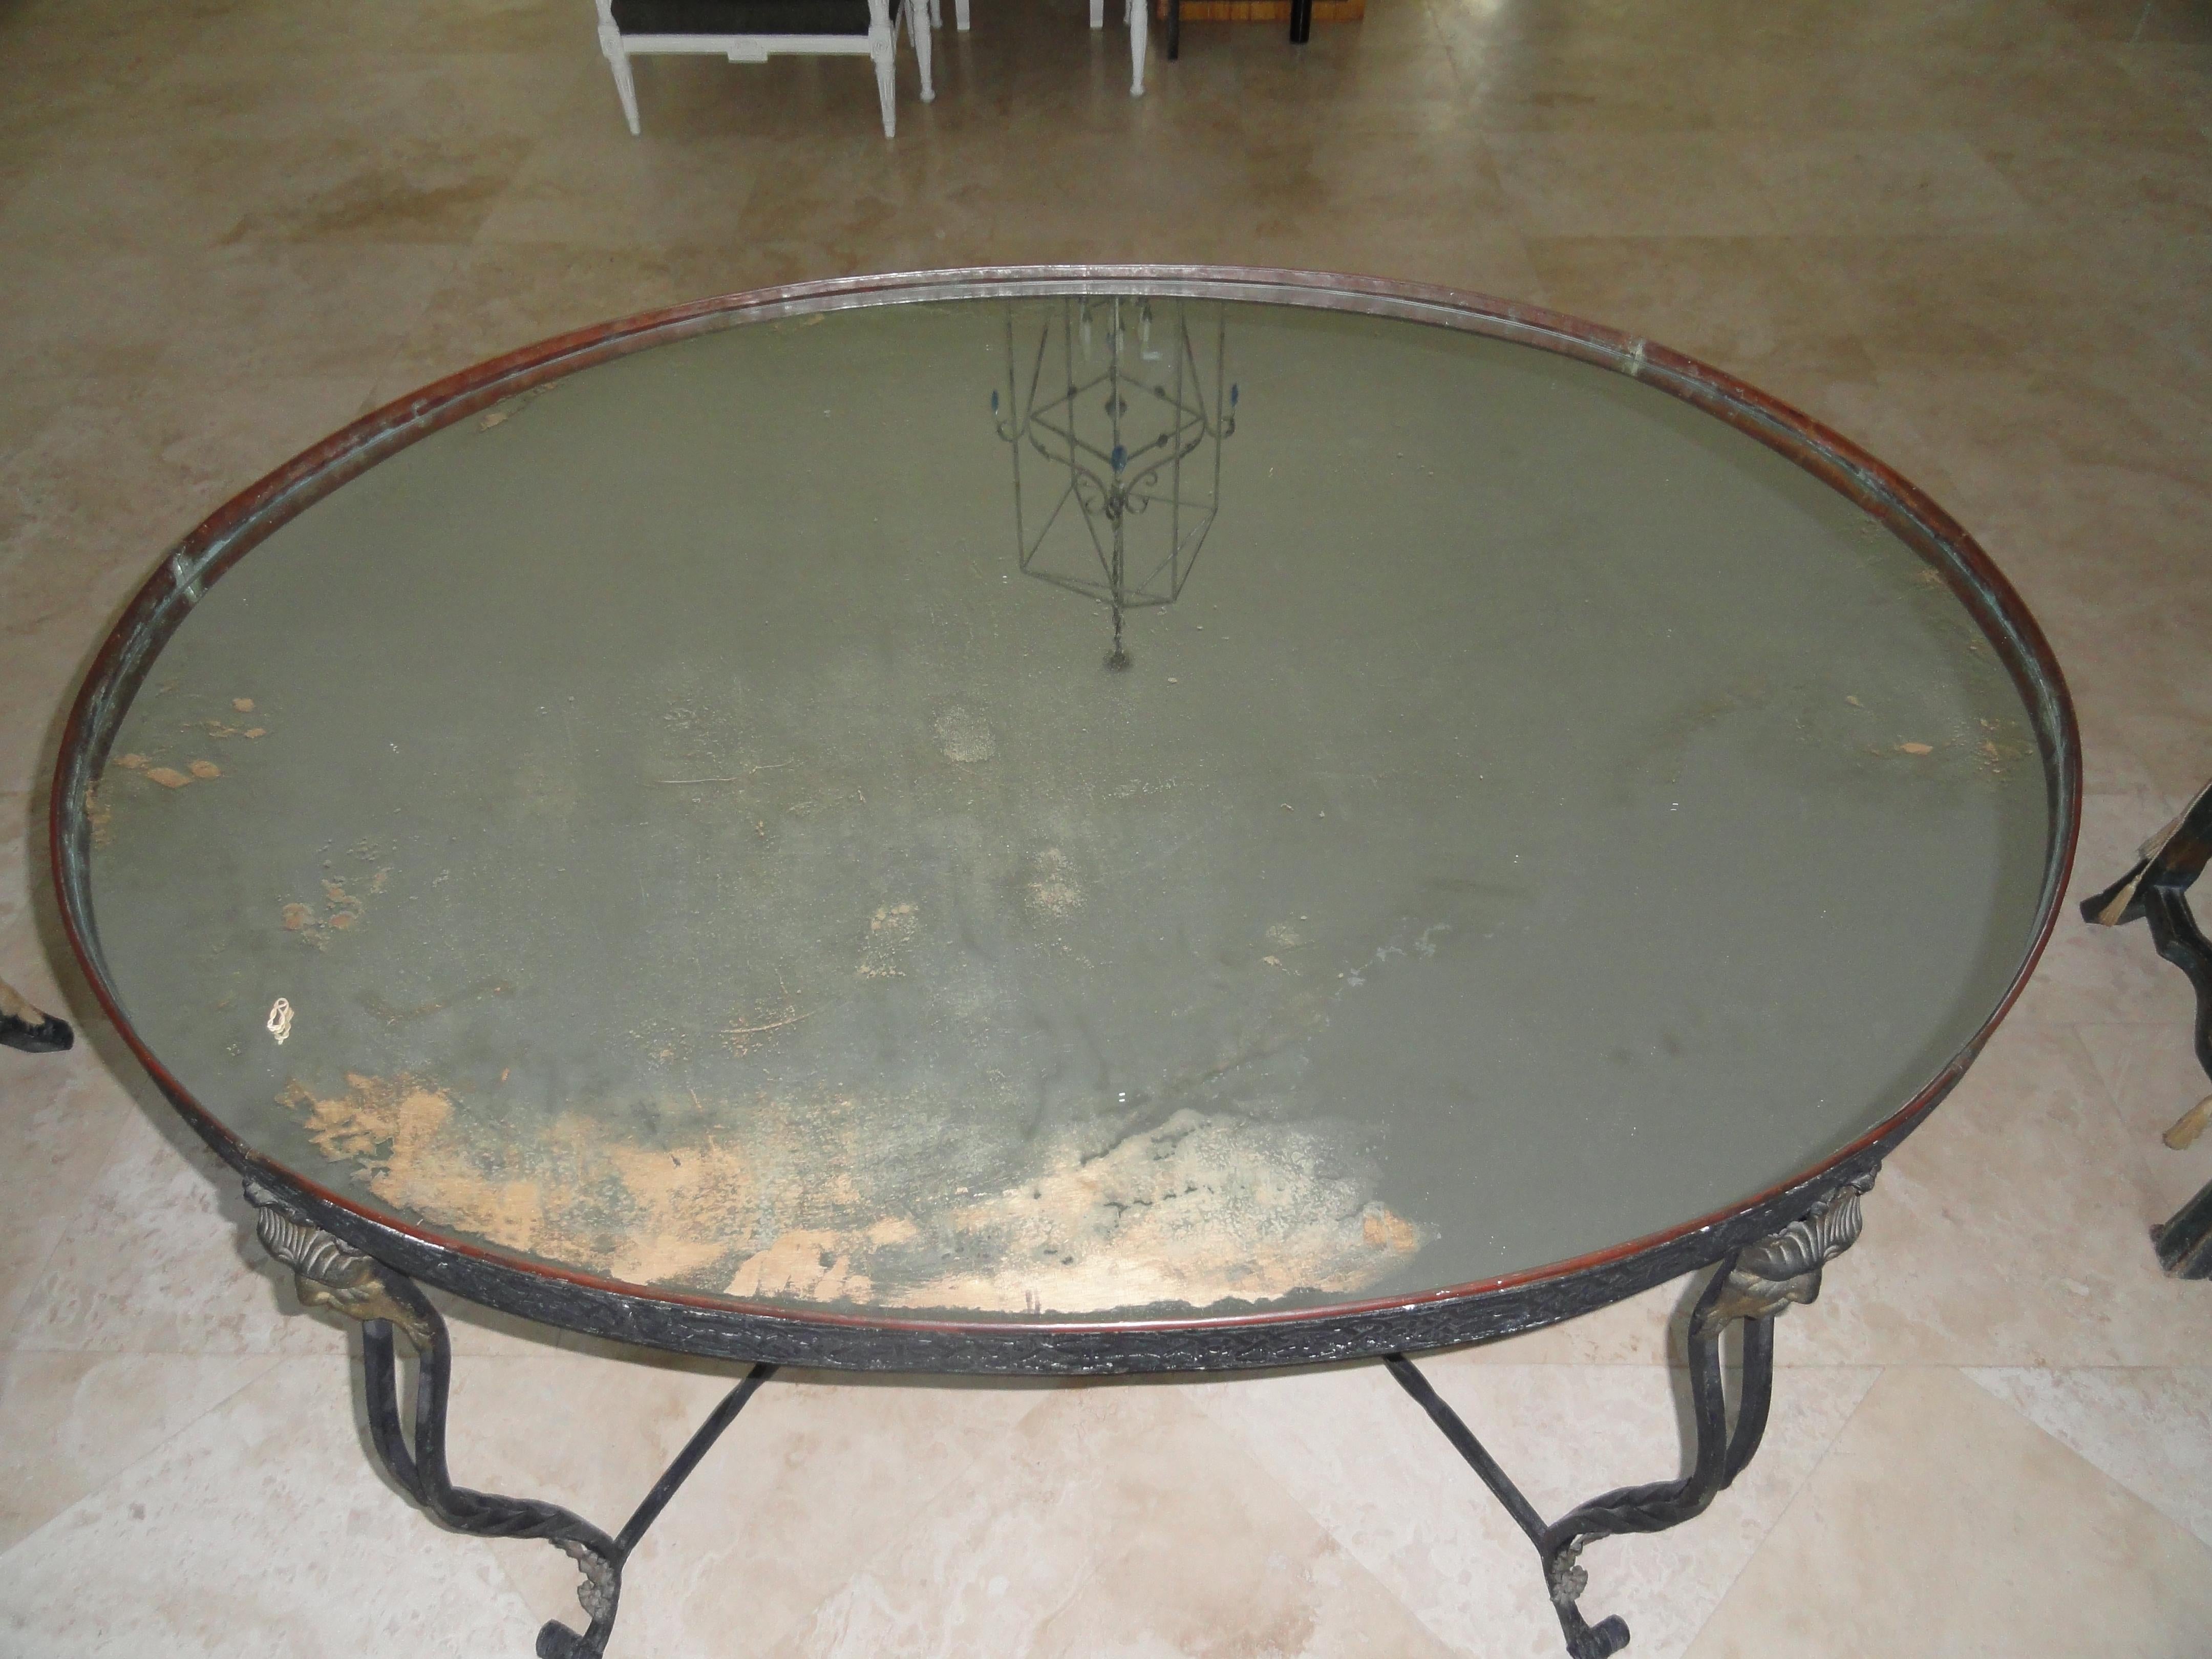 19th century French elliptical table with copper insert top. Four shaped metal legs terminating in metal masks. Shaped stretcher. Intricate apron detail. Inserted copper tray with mirrored inset.
A stunning example of French metal craft designed as